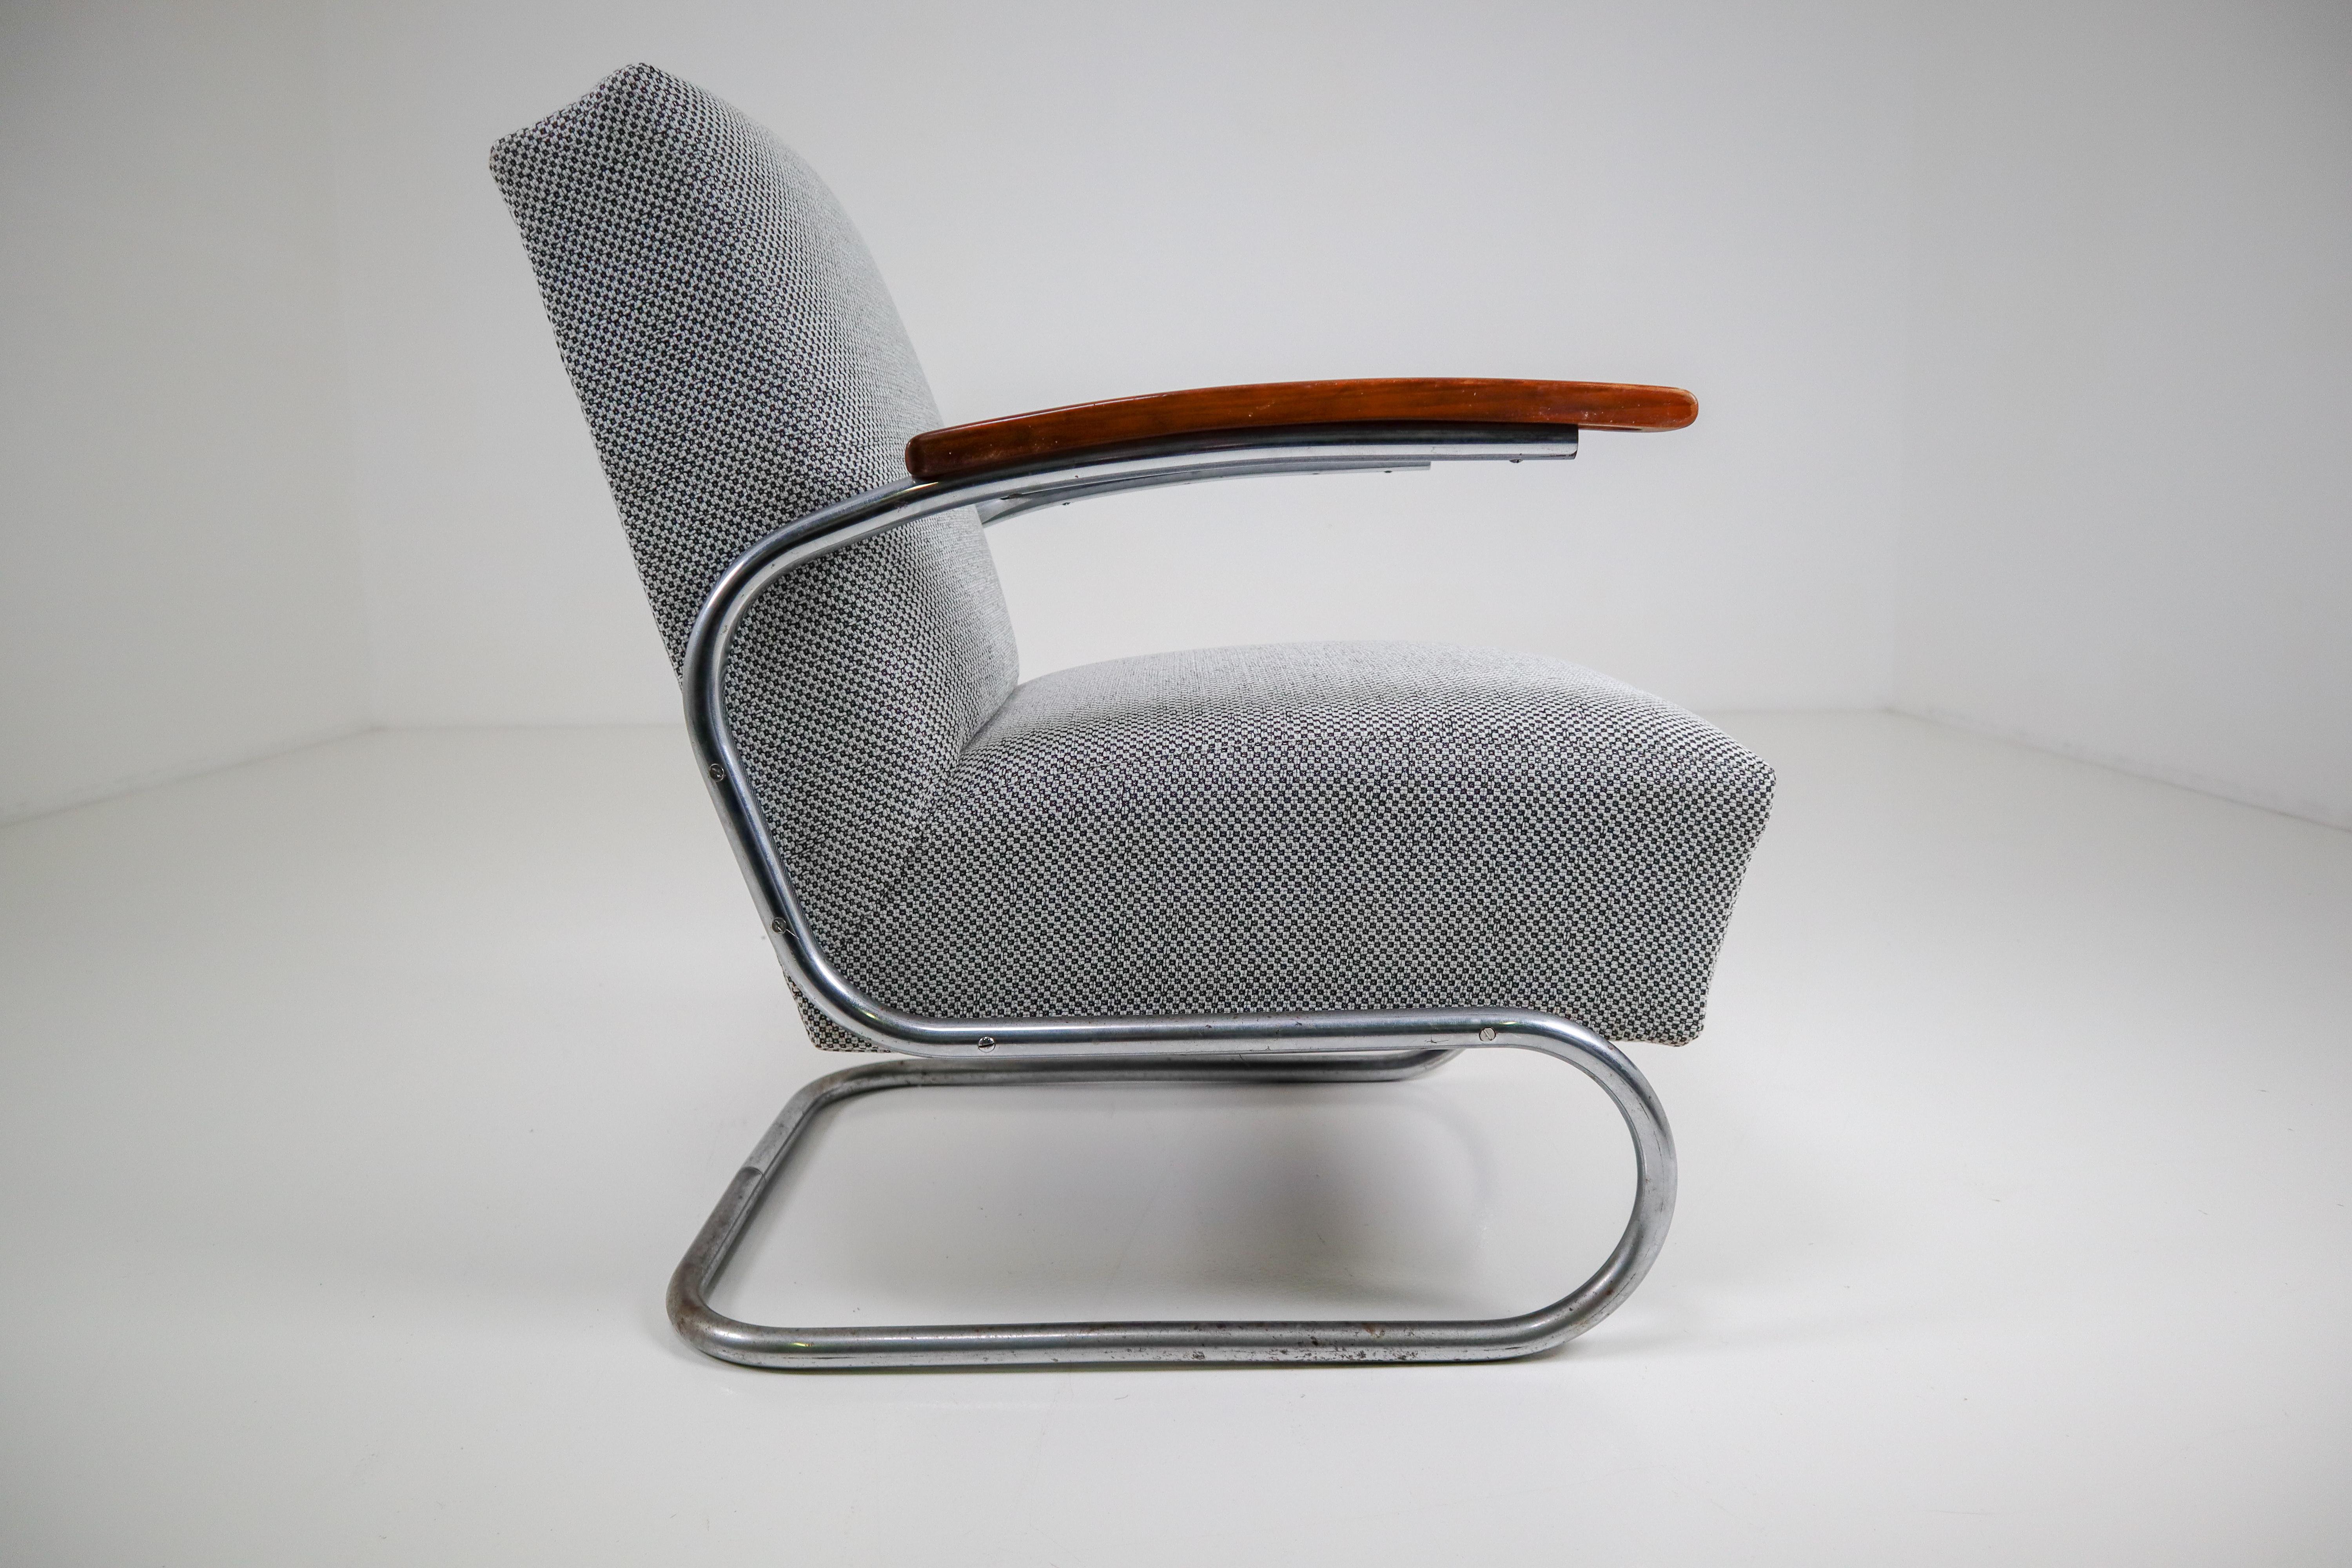 Model S411 armchairs by Thonet circa 1930s midcentury Bauhaus period. These cantilever armchairs are typical for the German and Eastern Europe Bauhaus era. These armchairs has a tubular steel frame and is
Re-upholstered with a grey fabric. The